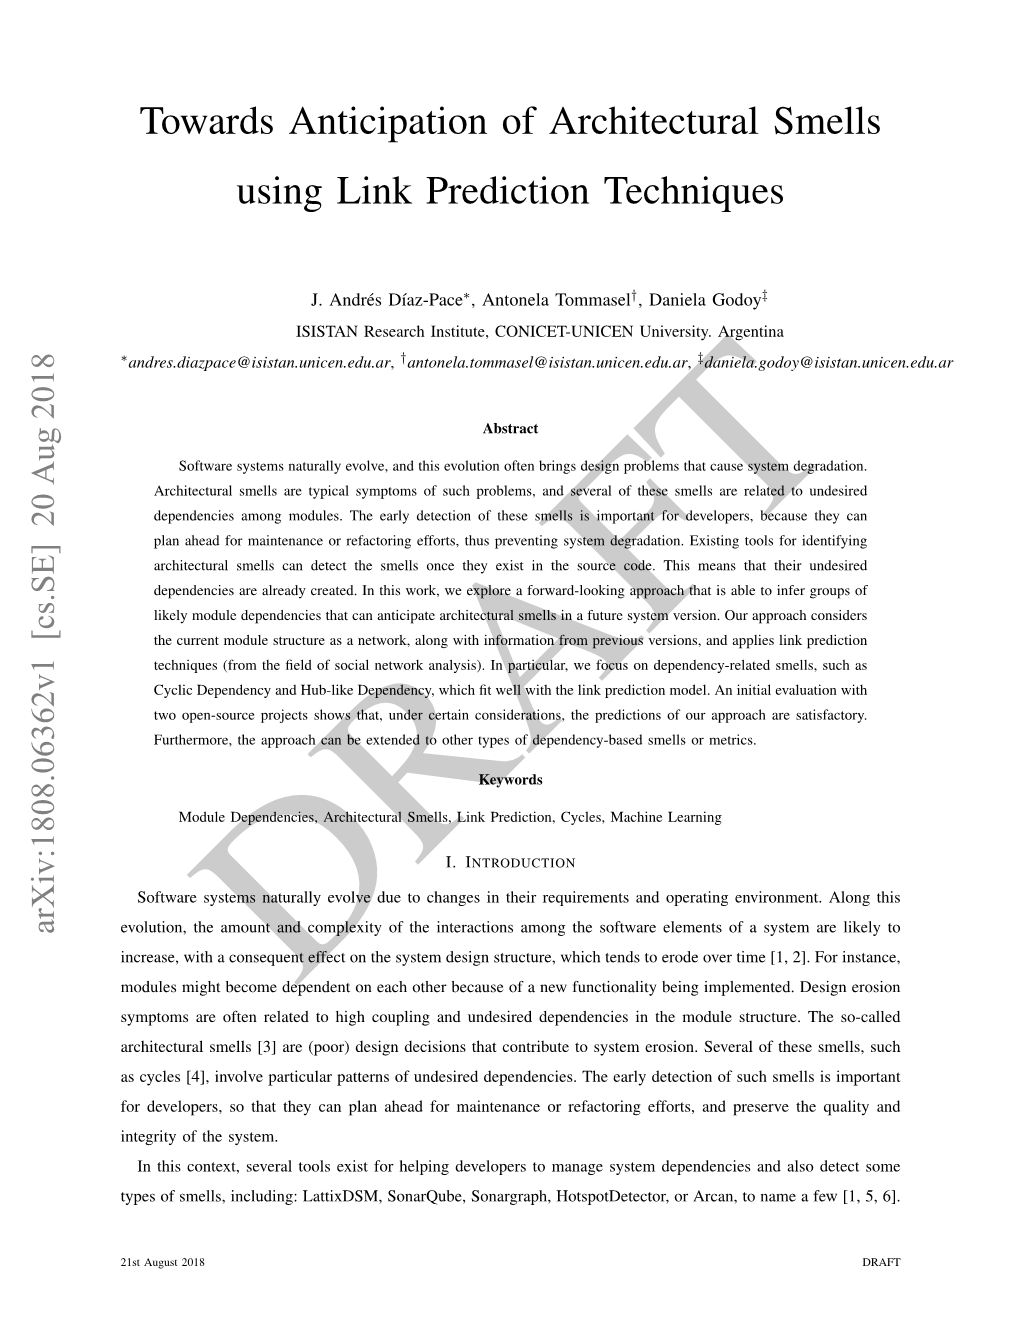 Towards Anticipation of Architectural Smells Using Link Prediction Techniques